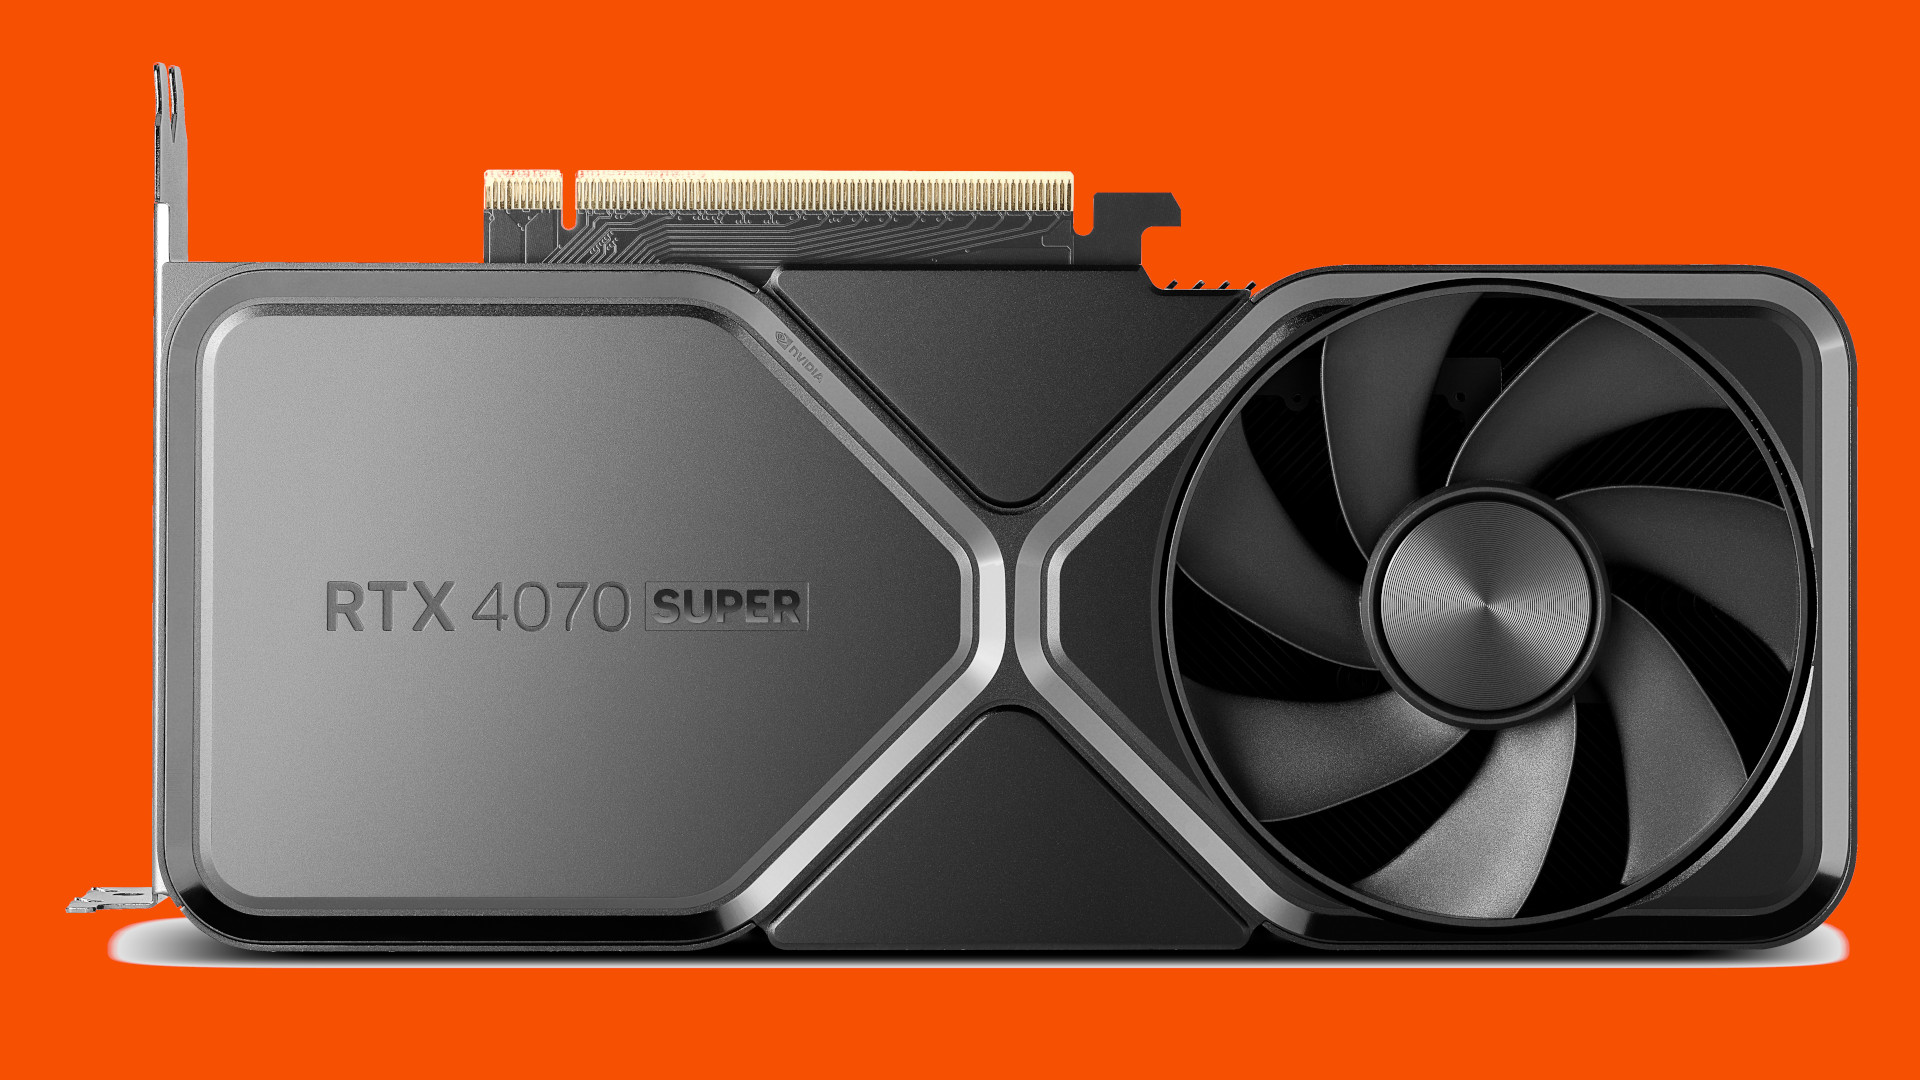 Nvidia GeForce RTX 3090 Ti prices, specs, benchmarks, and where to buy